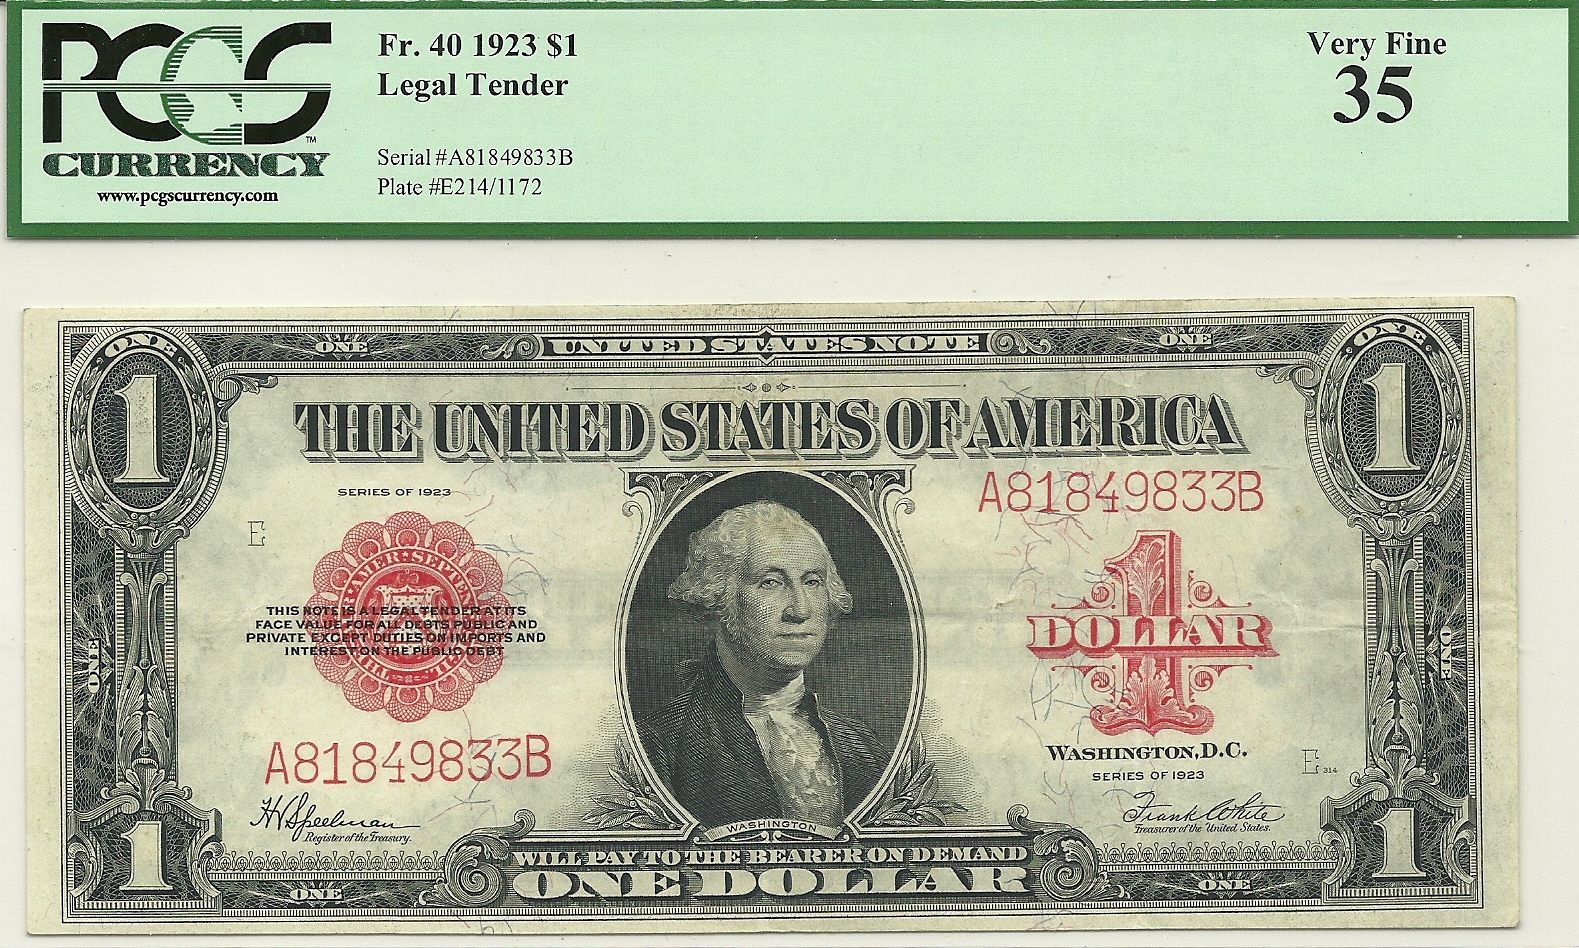 1923  $1 RED SEAL LEGAL TENDER NOTE- FR. 40 - SUPER BRIGHT PCGS VERY FINE 35